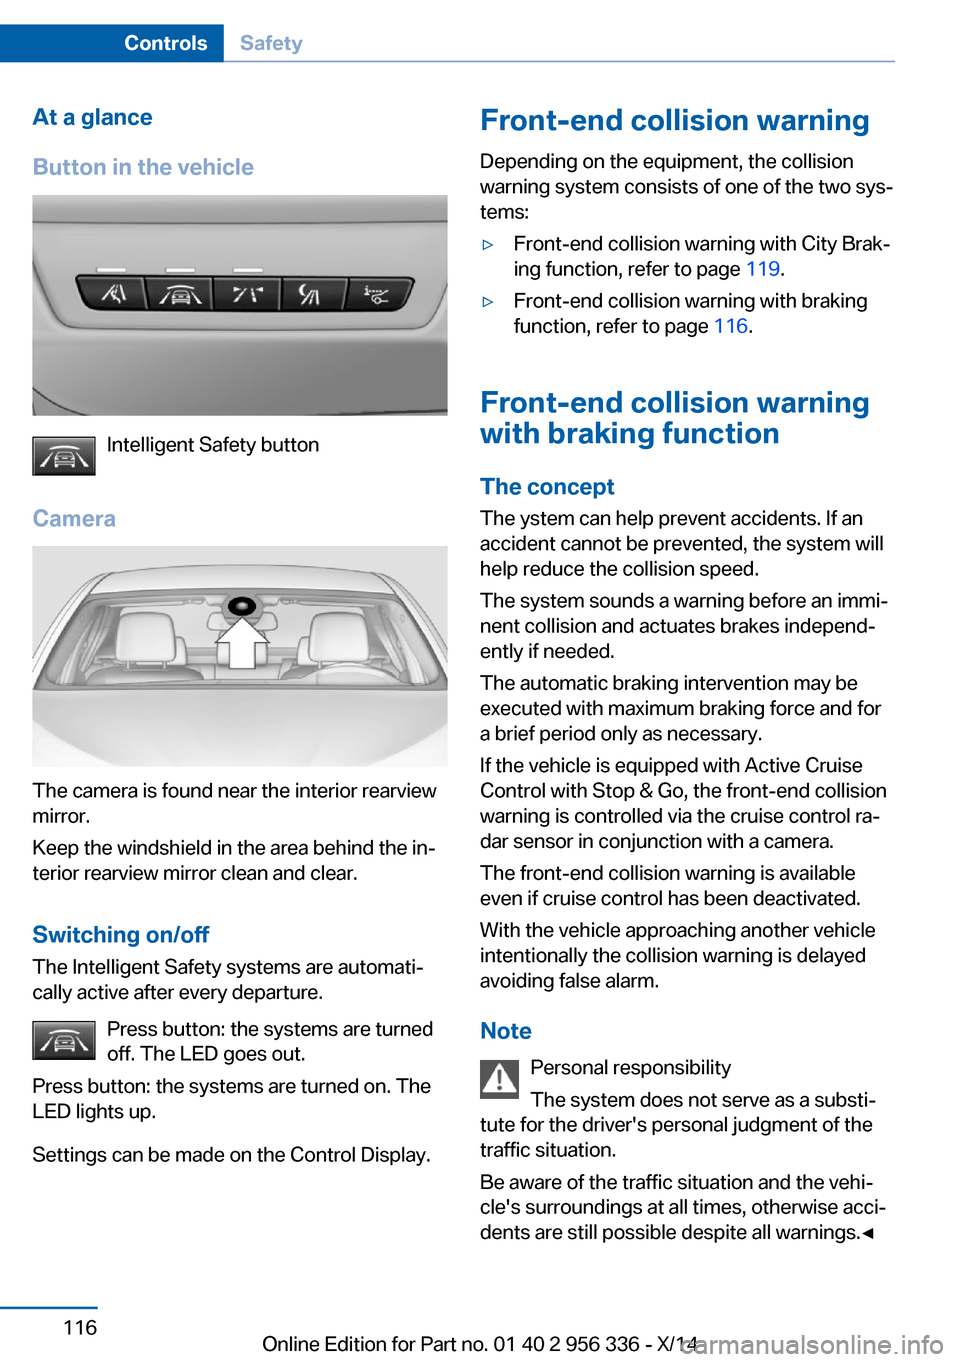 BMW 6 SERIES CONVERTIBLE 2014 F12 Owners Manual At a glance
Button in the vehicle
Intelligent Safety button
Camera
The camera is found near the interior rearview
mirror.
Keep the windshield in the area behind the in‐
terior rearview mirror clean 